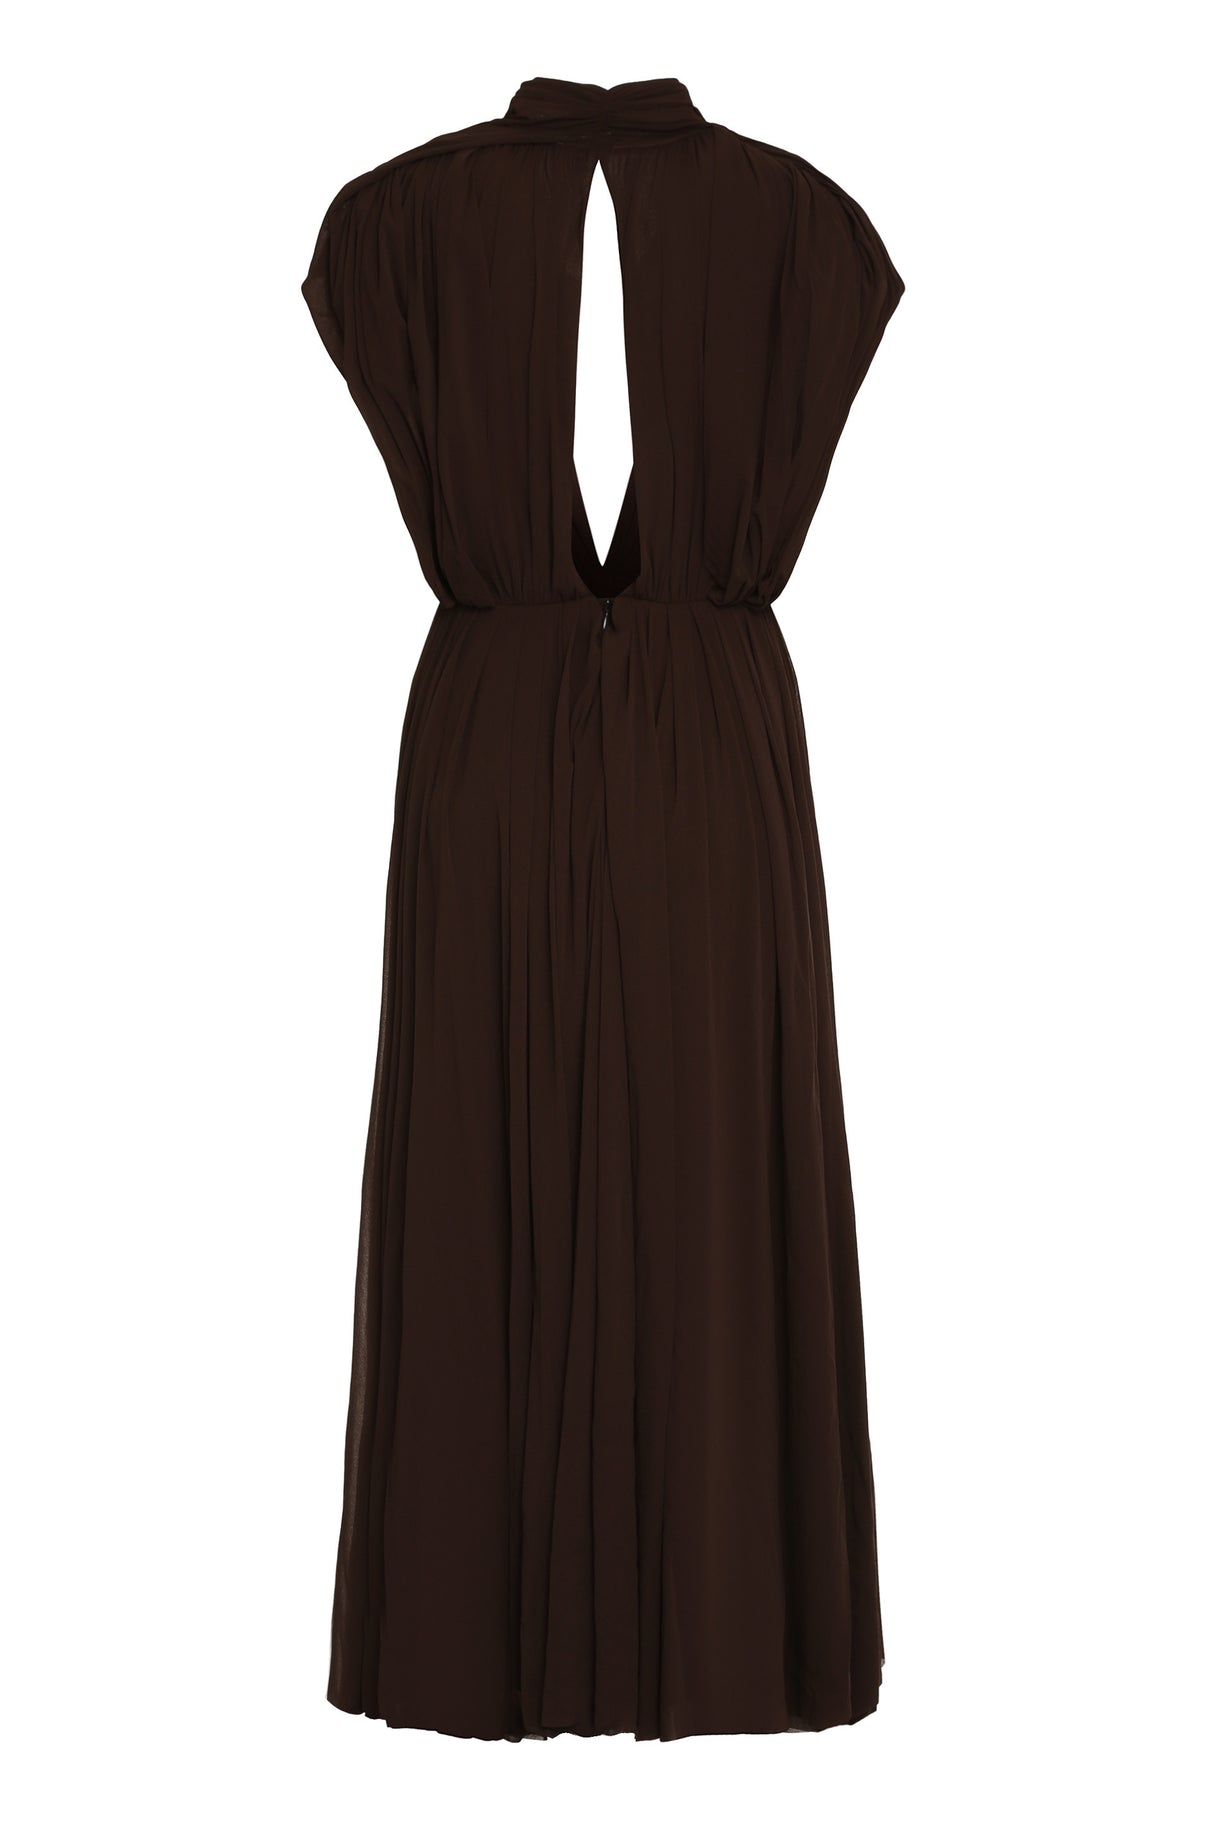 Elegant Brown Crepe Dress with Wide Neckline for Women - SS24